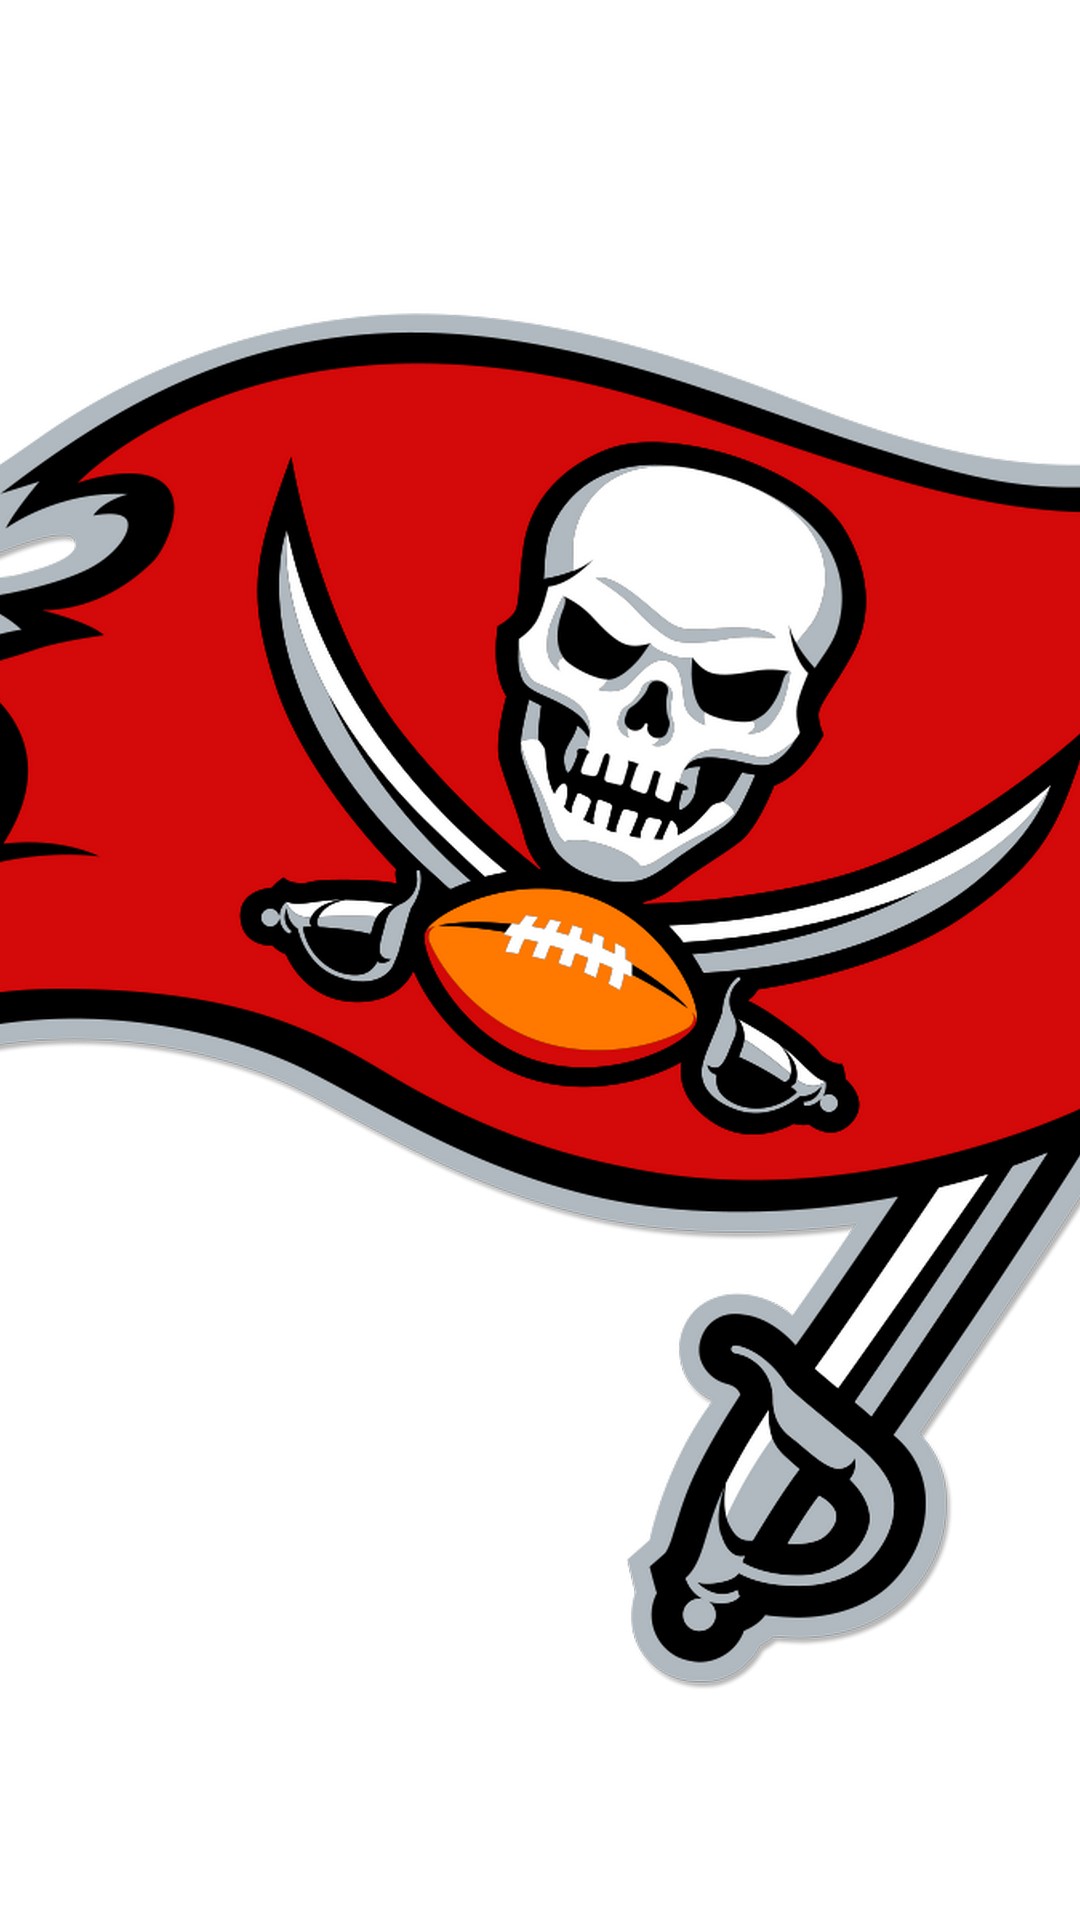 Tampa Bay Buccaneers Logo iPhone Apple Wallpaper With high-resolution 1080X1920 pixel. Donwload and set as wallpaper for your iPhone X, iPhone XS home screen backgrounds, XS Max, XR, iPhone8 lock screen wallpaper, iPhone 7, 6, SE, and other mobile devices